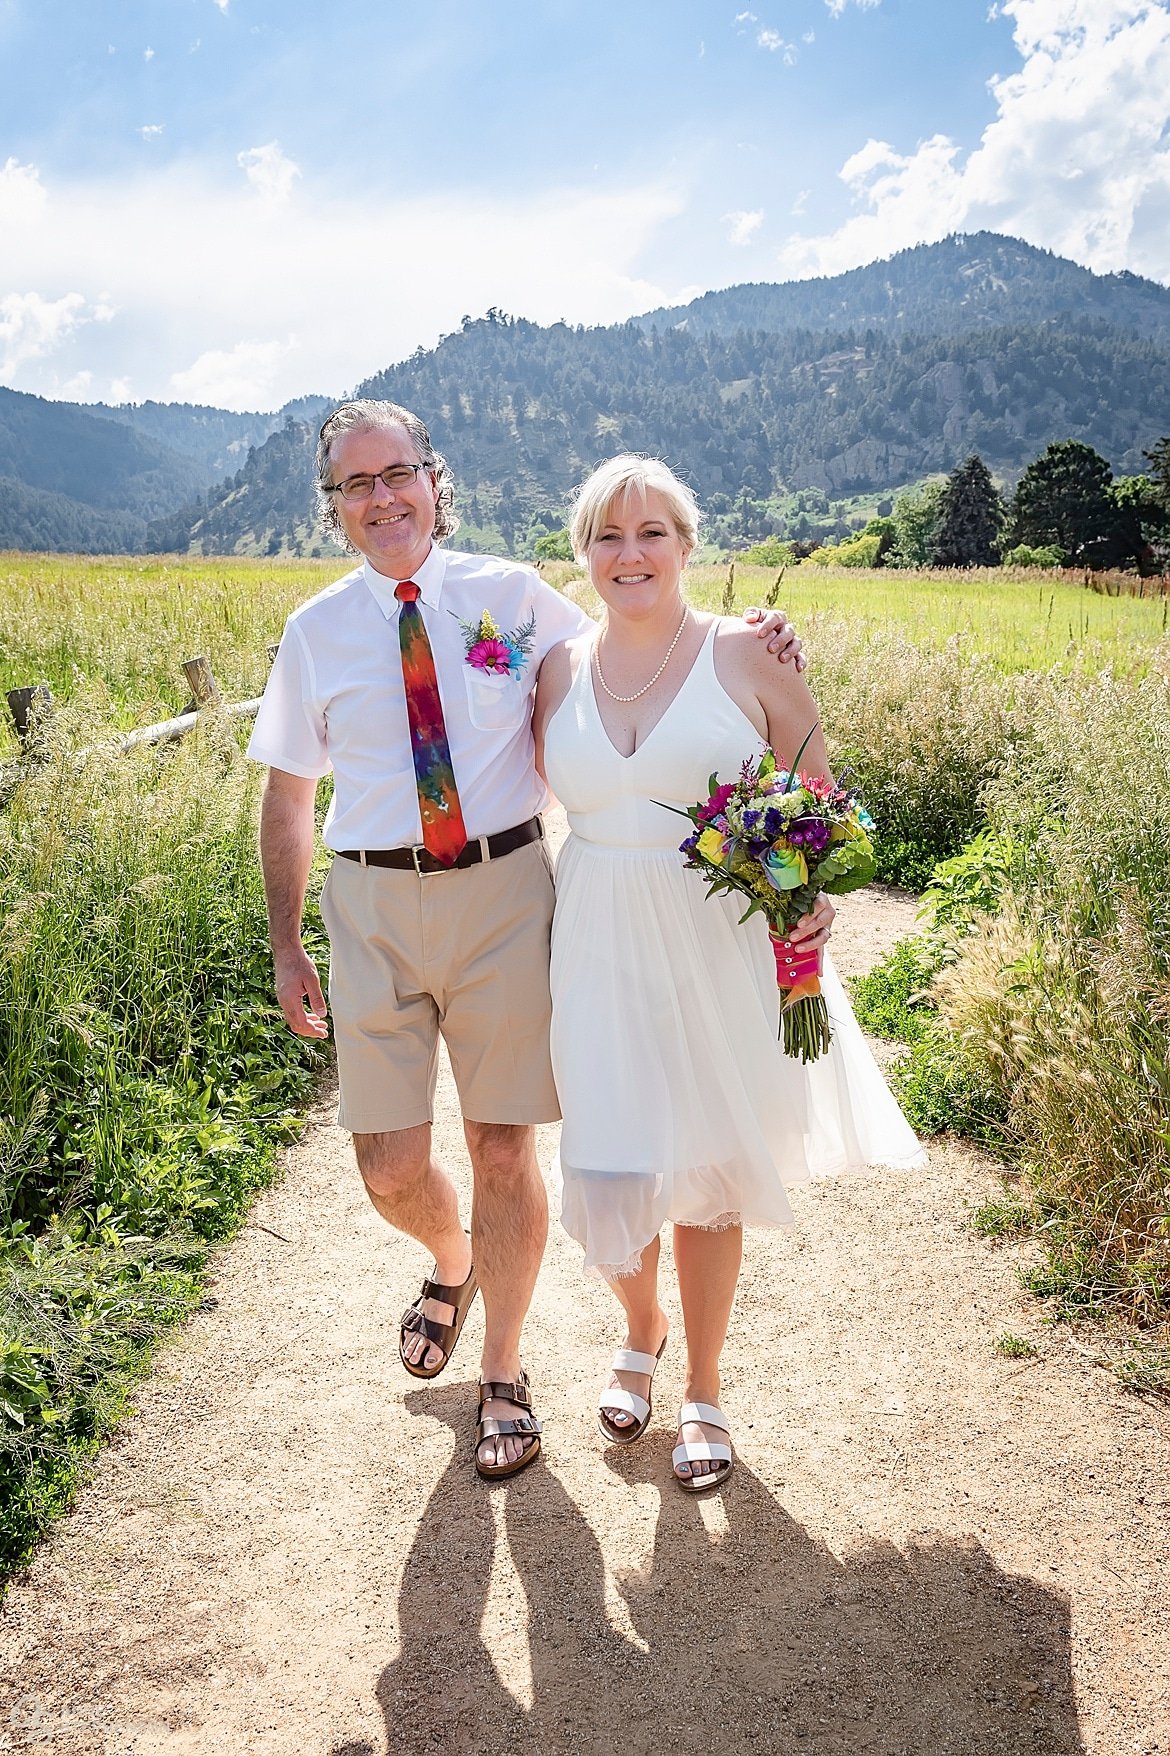 The bride and groom in white with tie-dye accessories and brightly colored bouquet walk along a pathway at Chautauqua Park, Boulder.